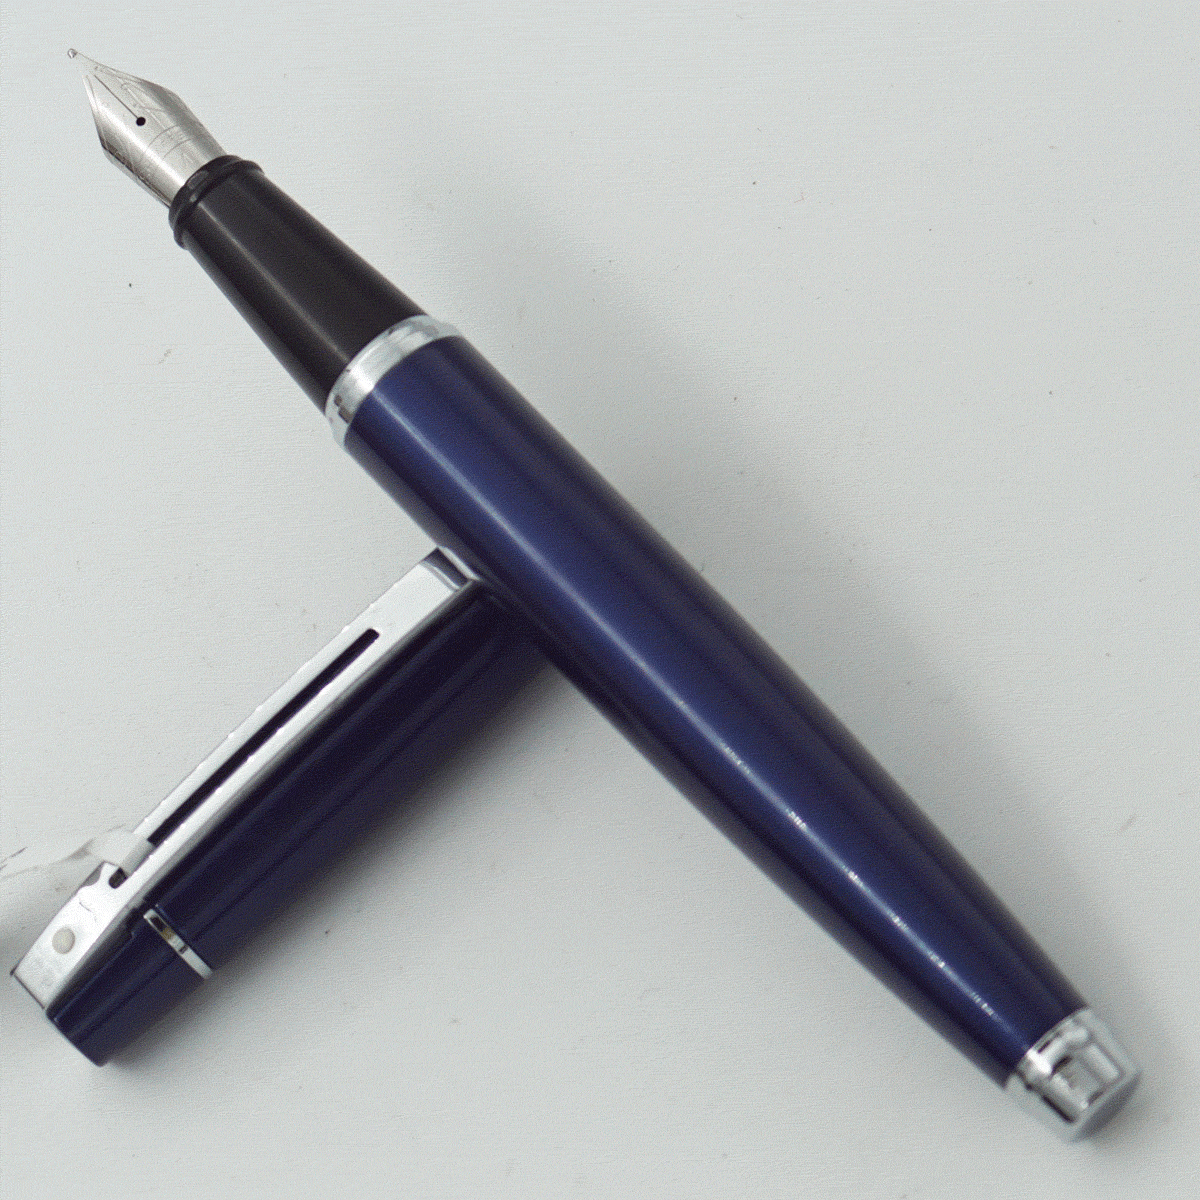 Sheaffer 9341 Blue Color Body With Blue Color Cap And Silver Trims With Silver Clip Medium Nib Converter Type Fountain Pen SKU 24174